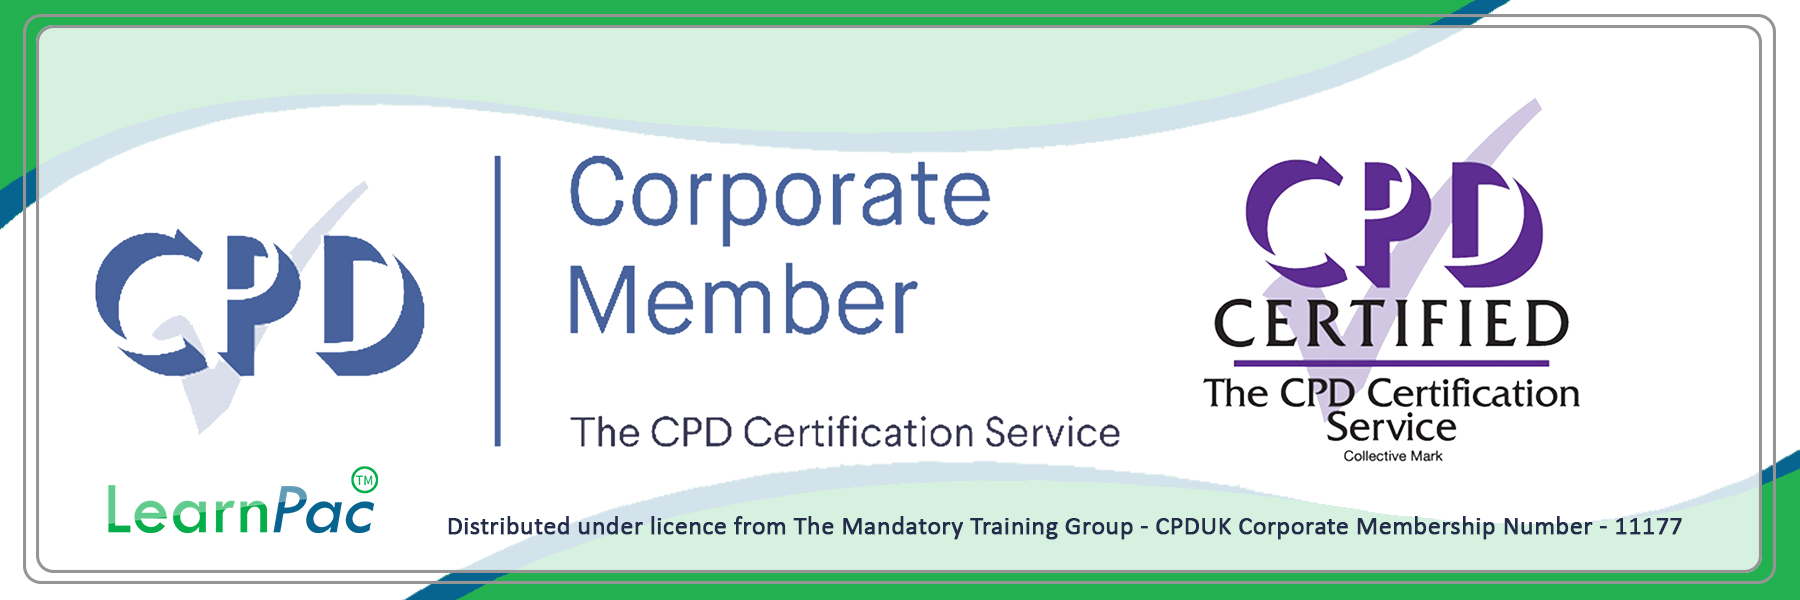 Child Protection- Online Training Course - CPDUK Certified - Learnpac System UK - (2)